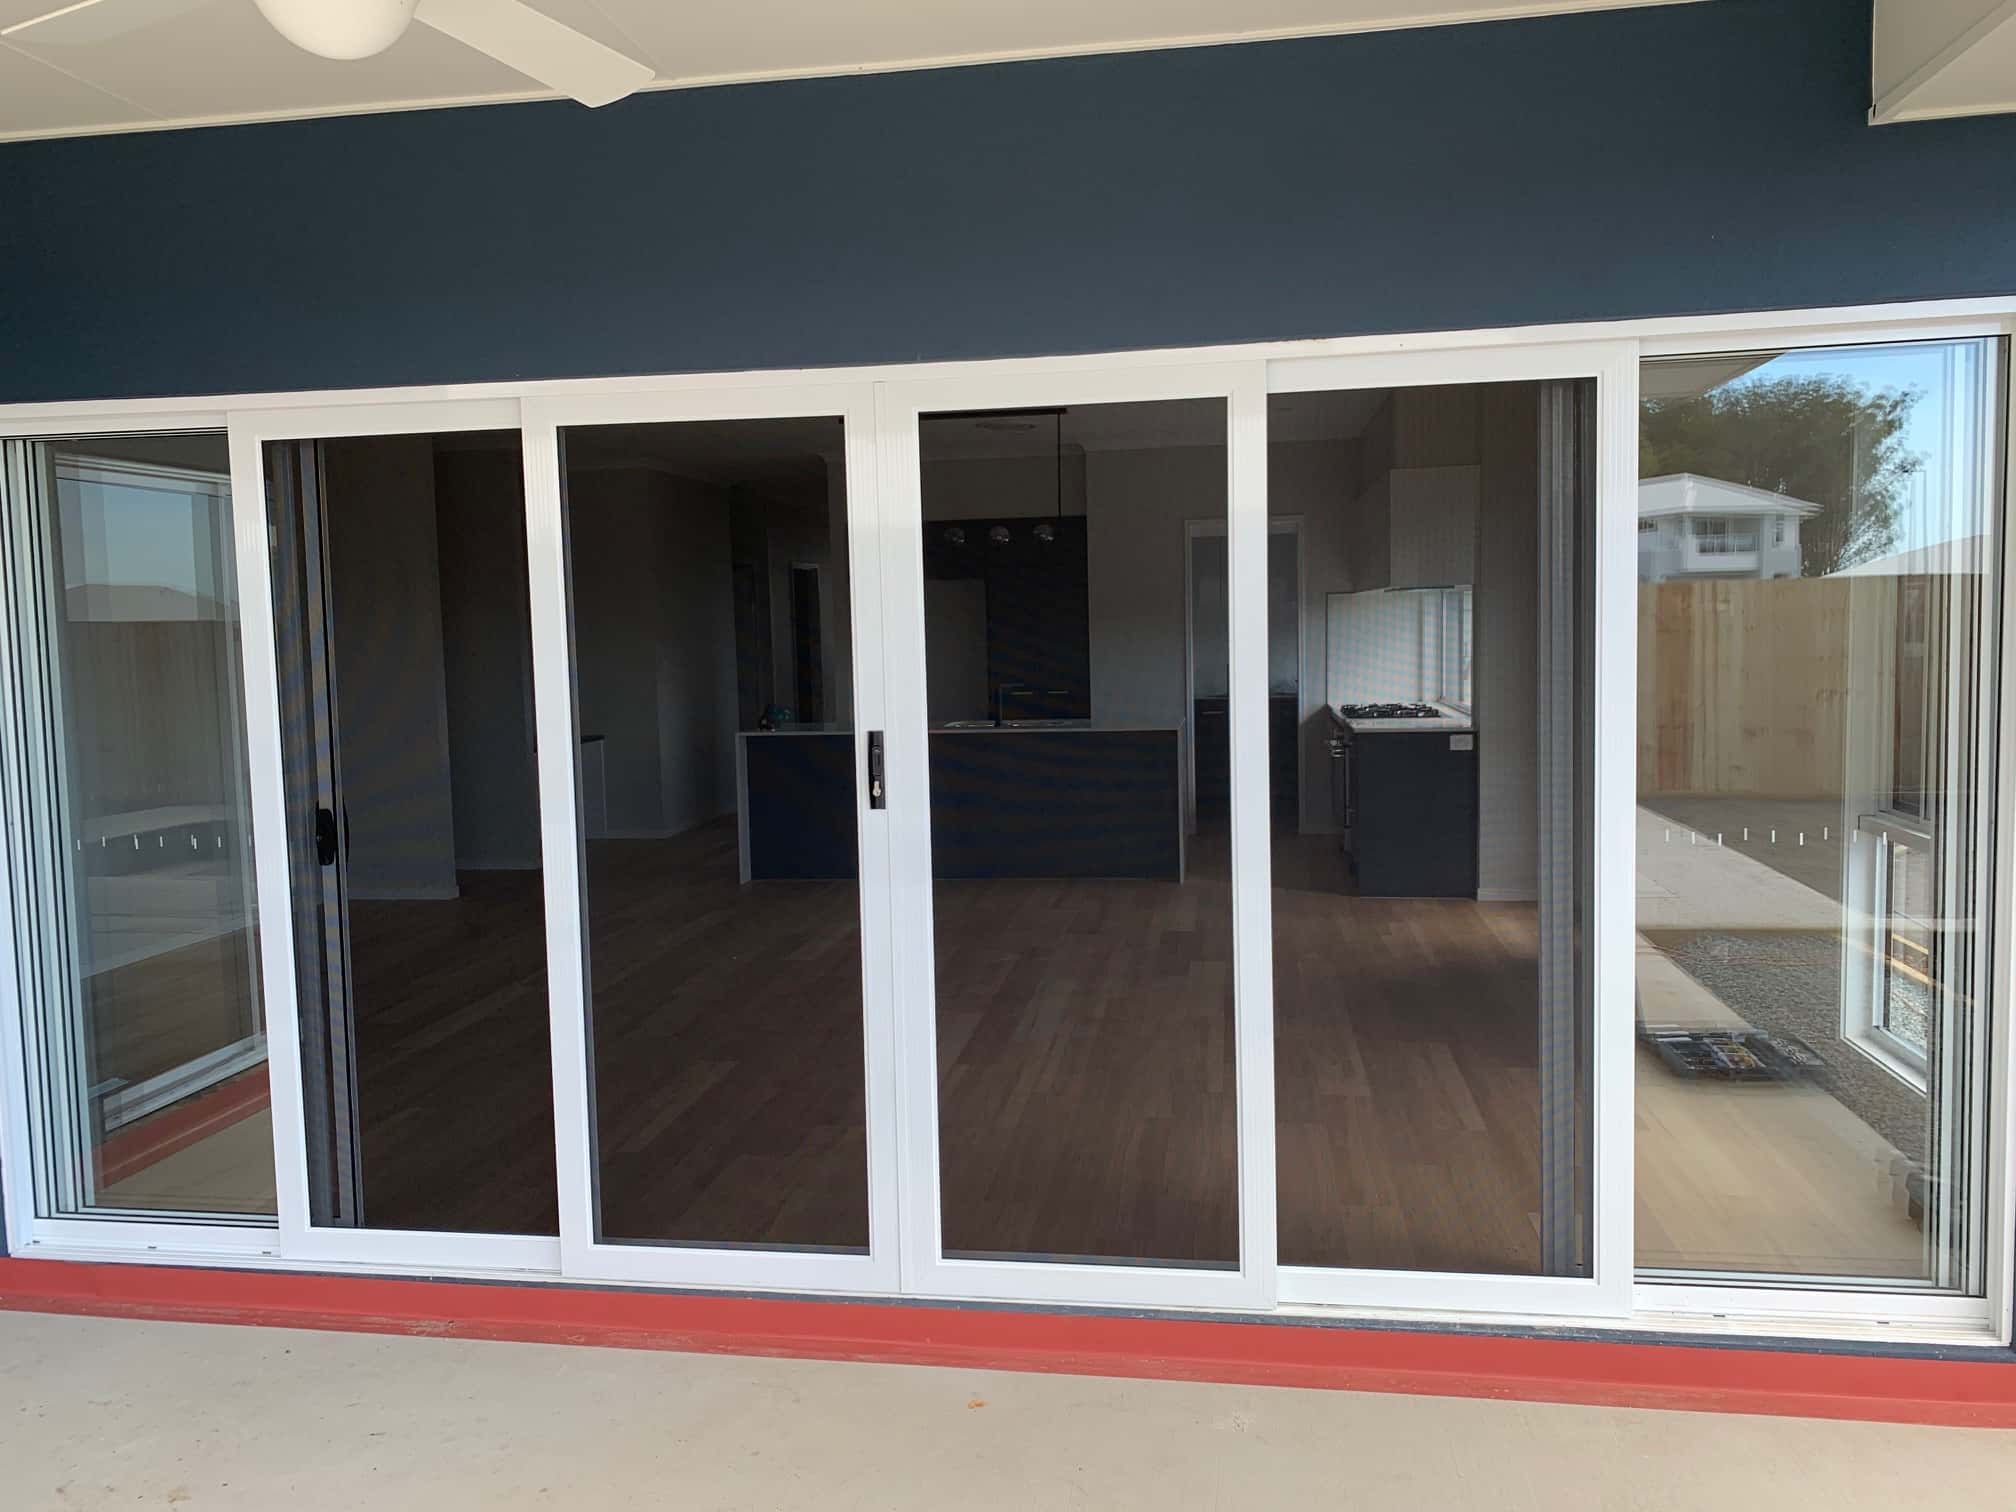 Stainless Steel Security Screens on Patio - Security Screen Doors in Sunshine Coast, QLD